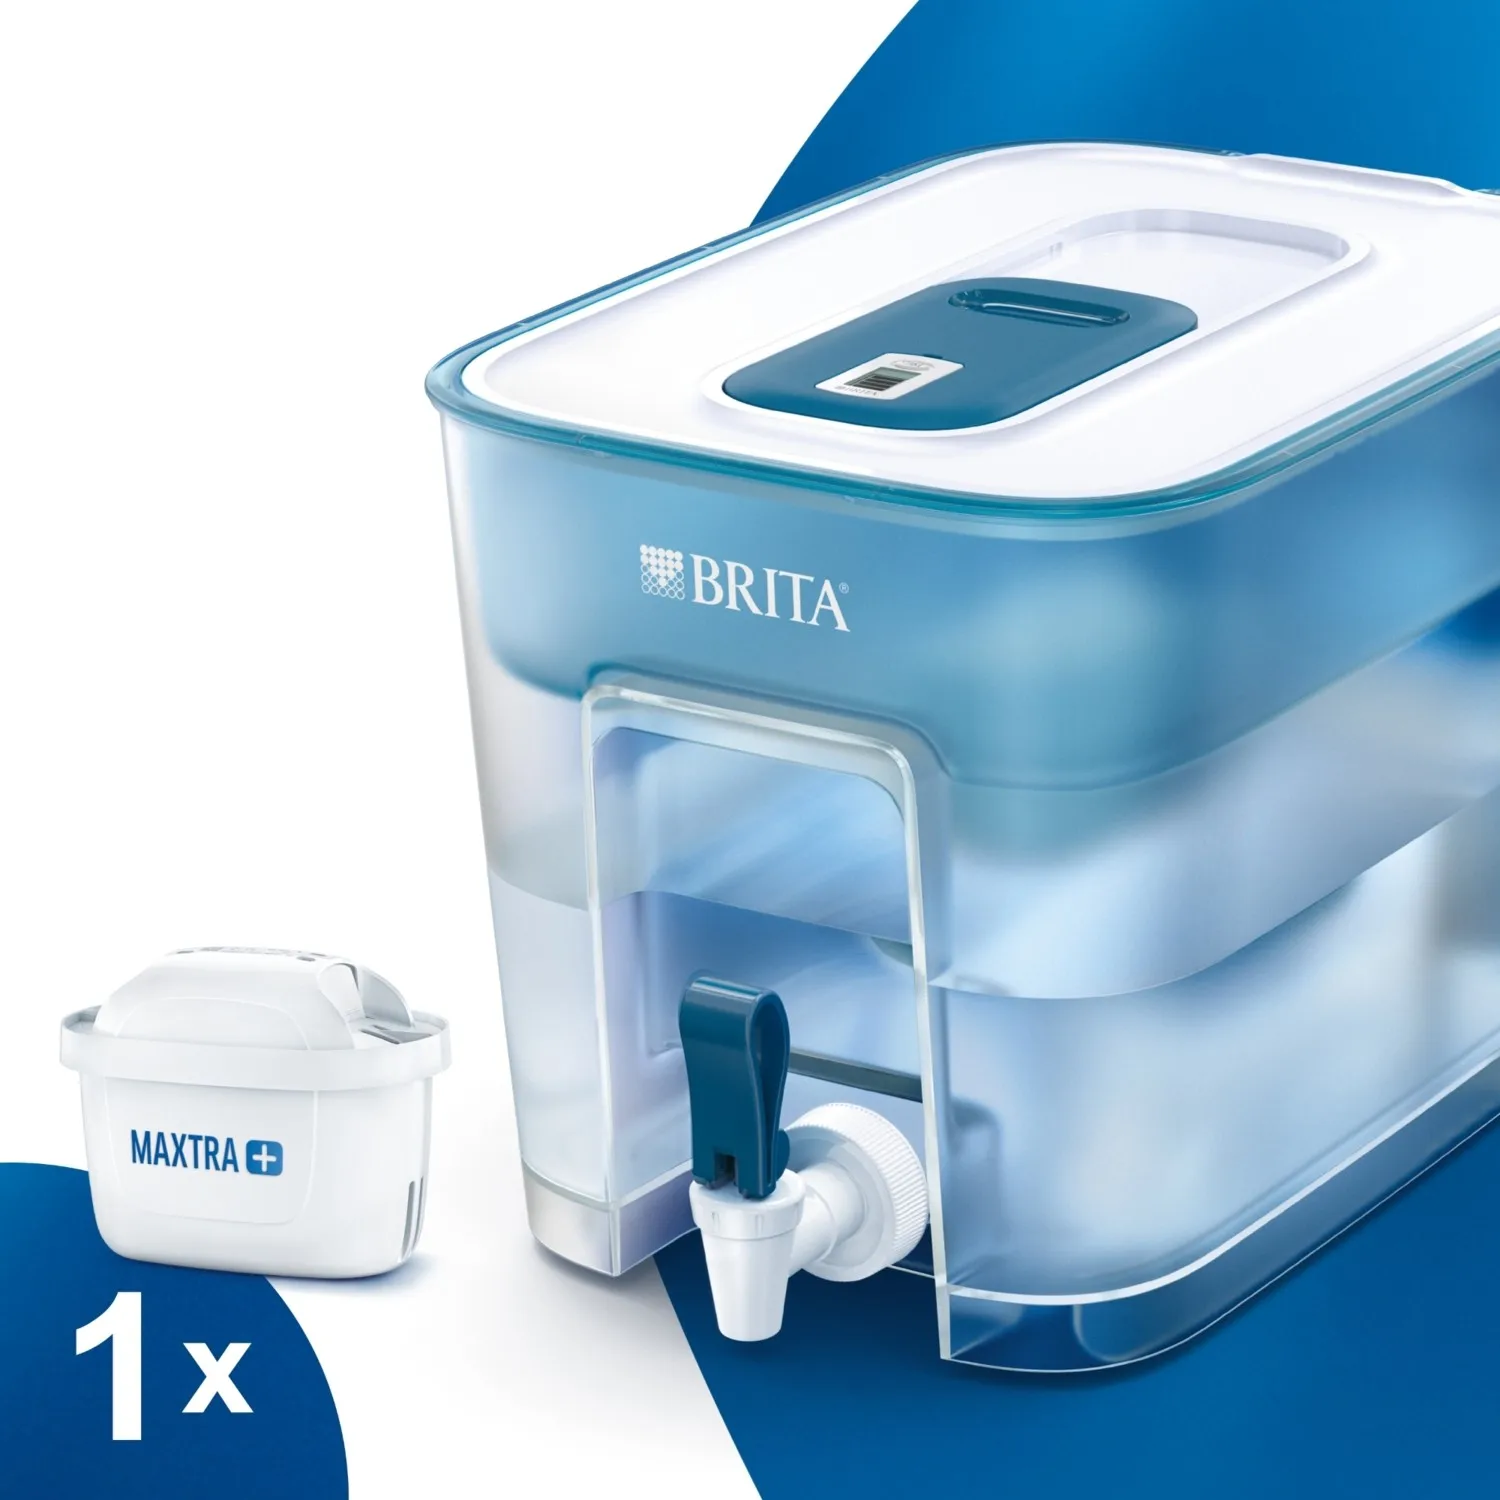 Original BRITA Flow XXL Fridge Water Filter Tank For Reduction Of Chlorine, Limescale And İmpurities, 8.2L -White/Teal